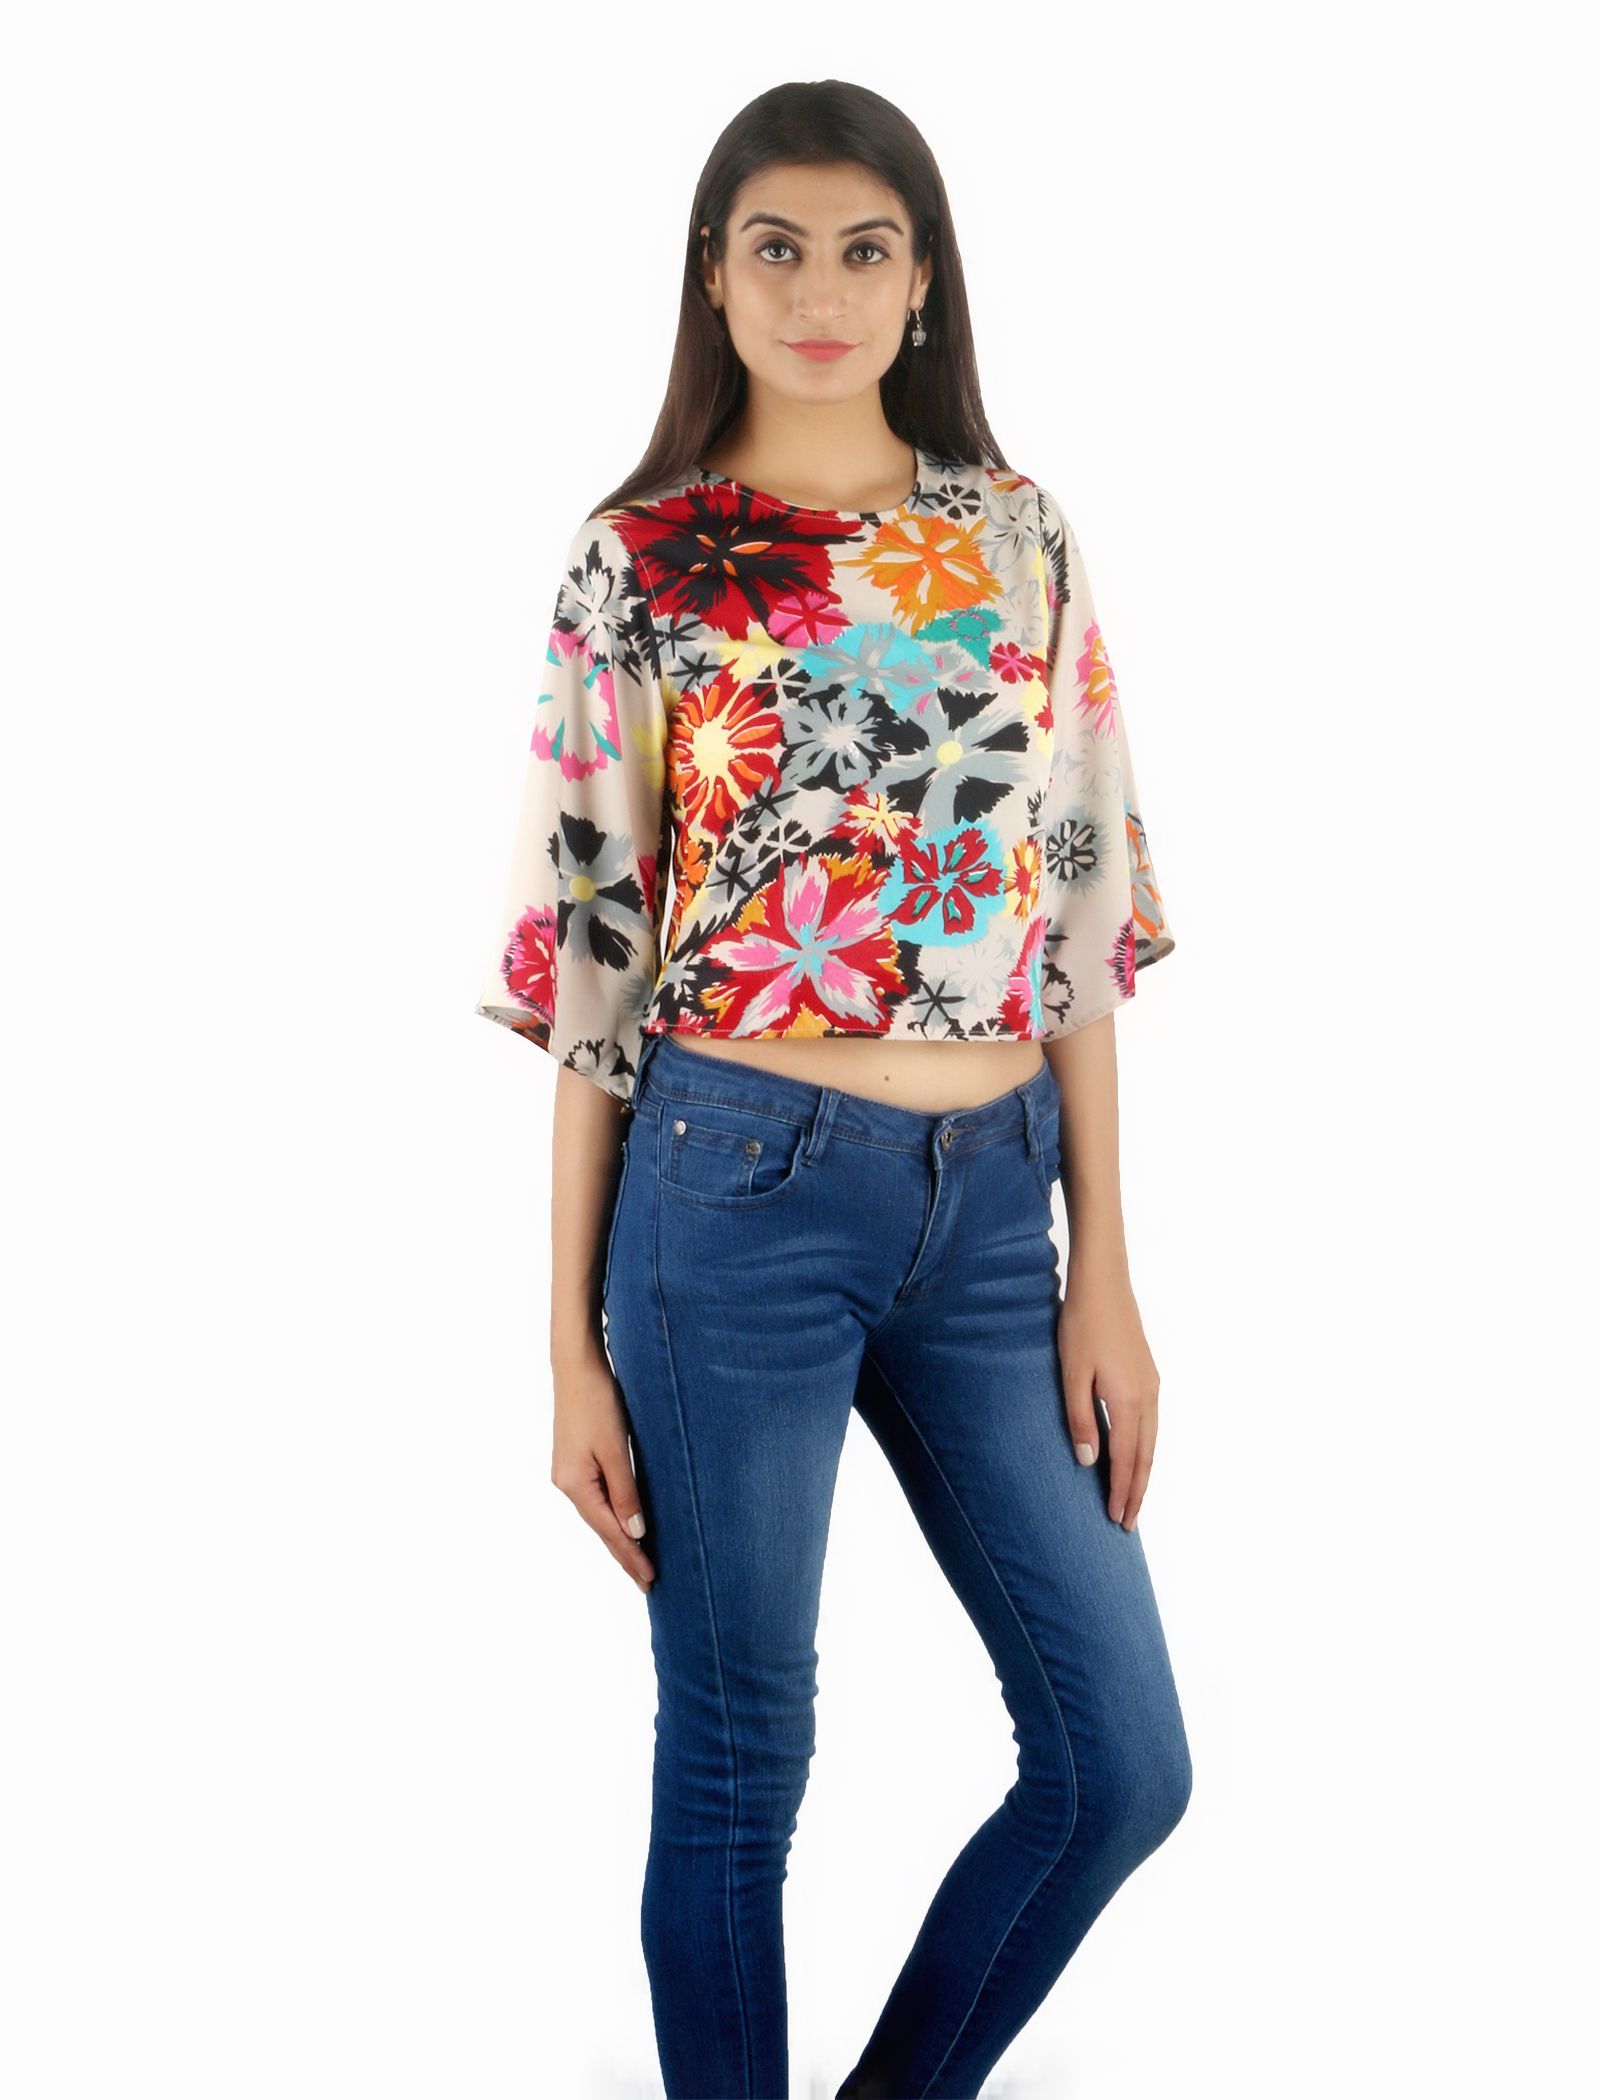 STakriti1 Poly Crepe Crop Tops - Multicolor - Buy STakriti1 Poly Crepe ...